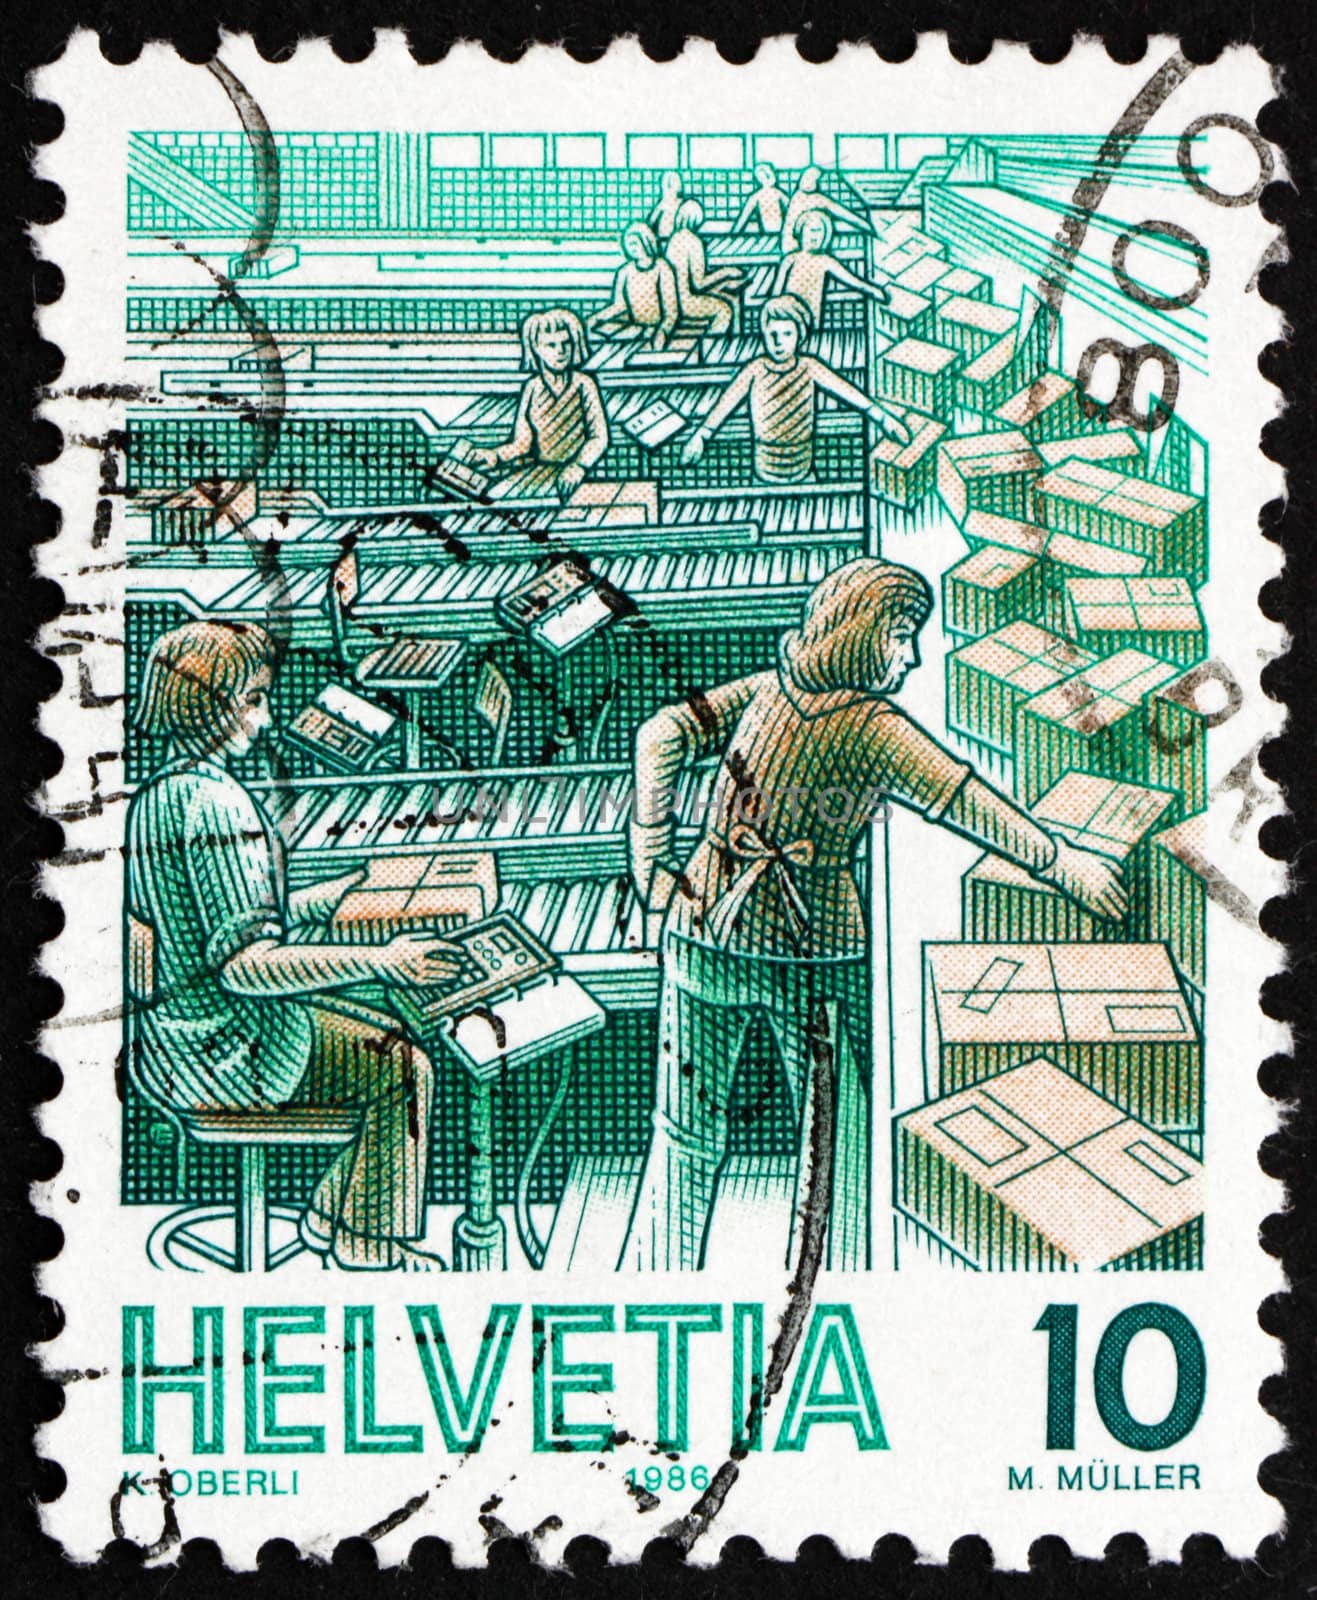 SWITZERLAND - CIRCA 1986: a stamp printed in the Switzerland shows Parcel Sorting, Mail Handling, circa 1986